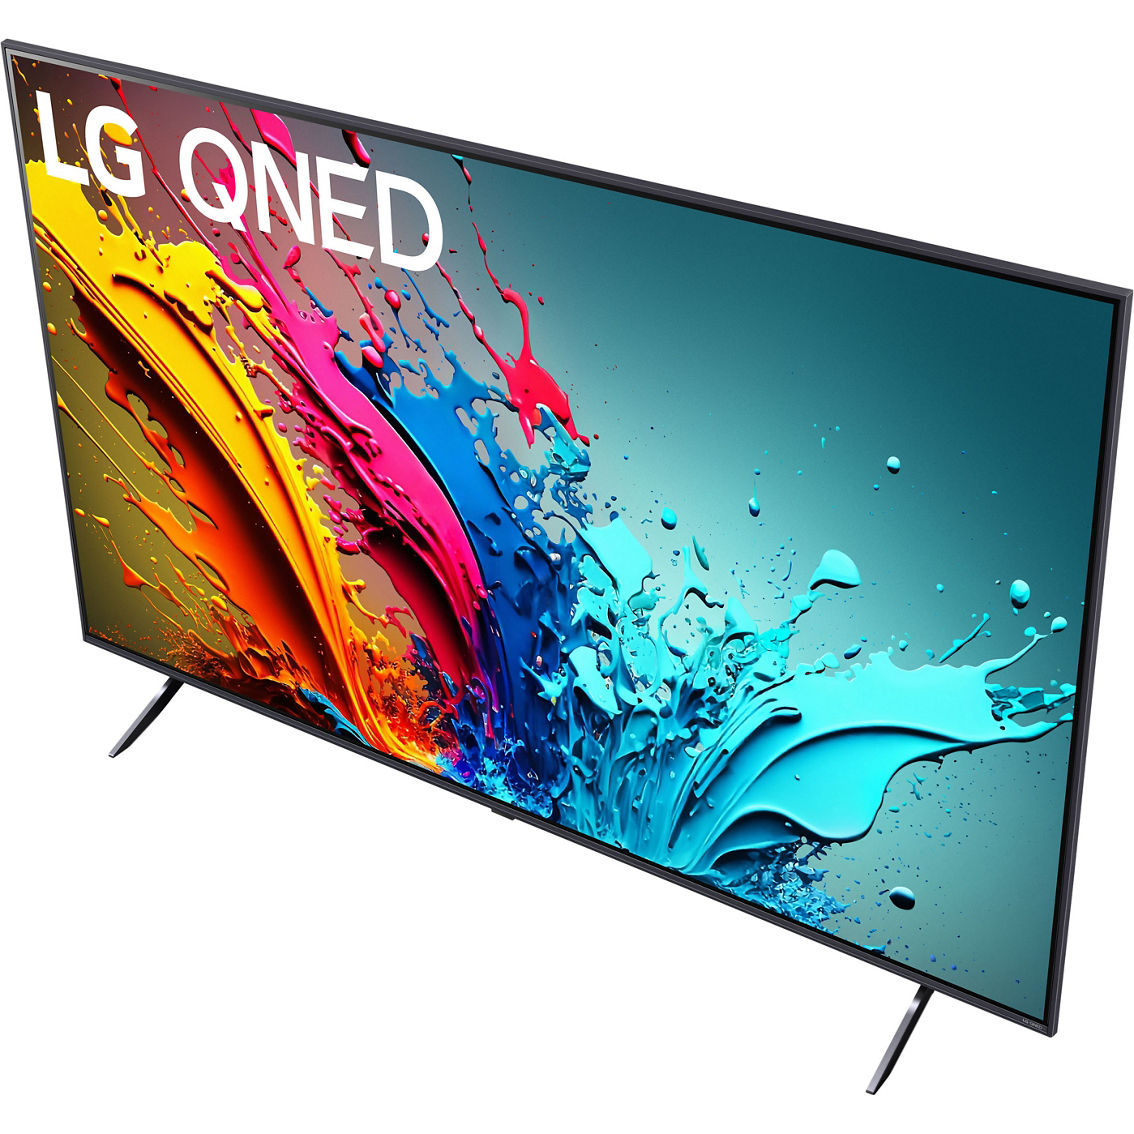 LG 86 in. QNED 85T-Series 120Hz 4K HDR LED Smart TV with webOS 24 86QNED85TUA - Image 8 of 10